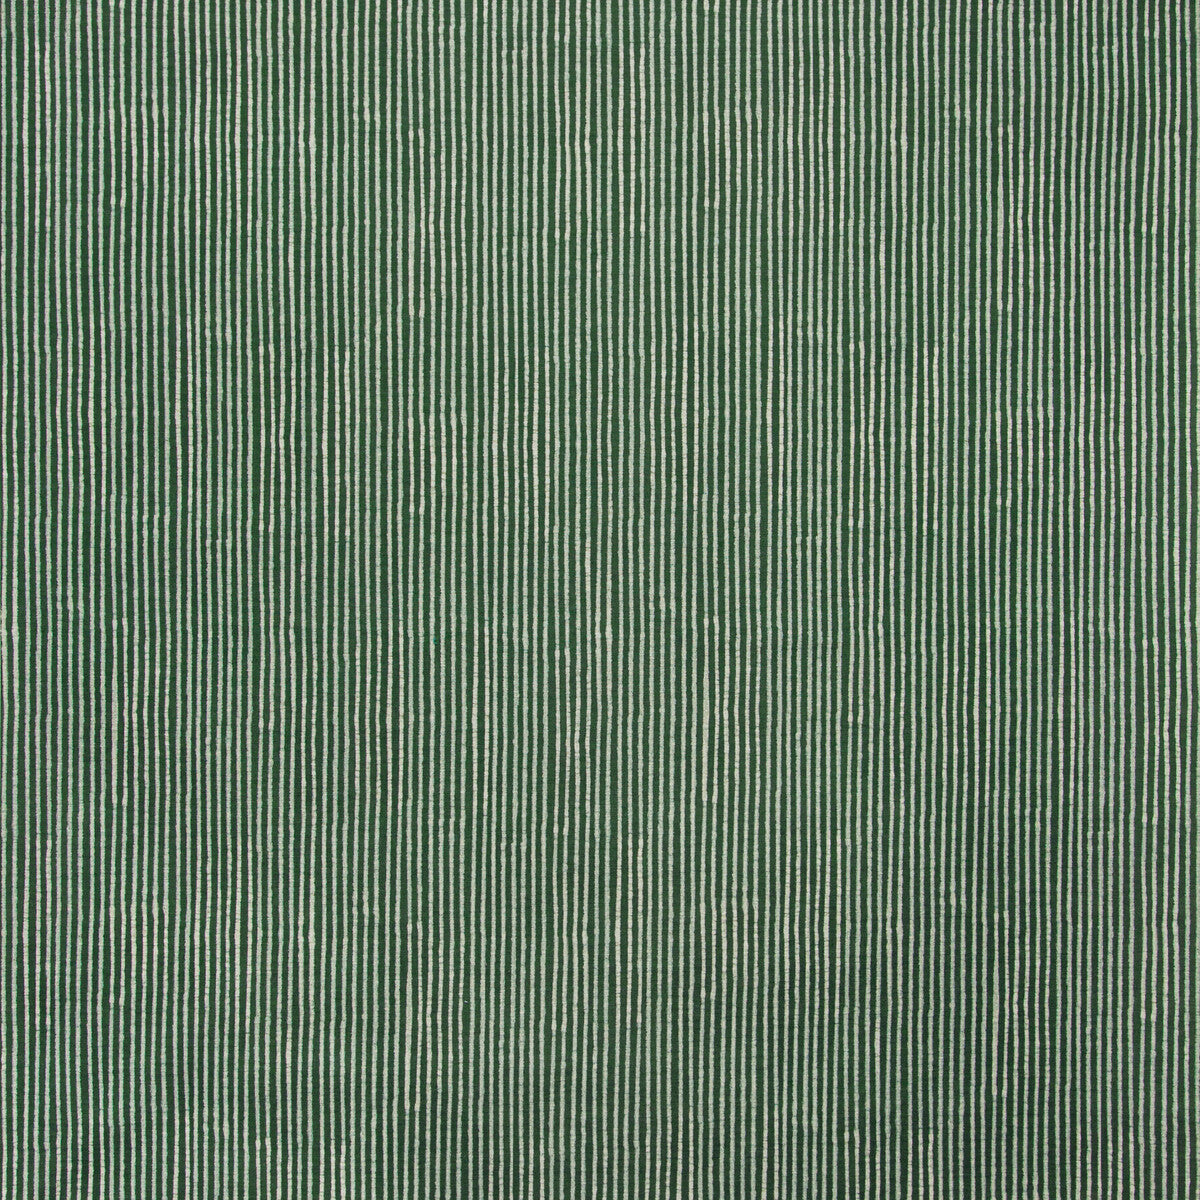 Bandol fabric in forest green color - pattern 2019125.31.0 - by Lee Jofa